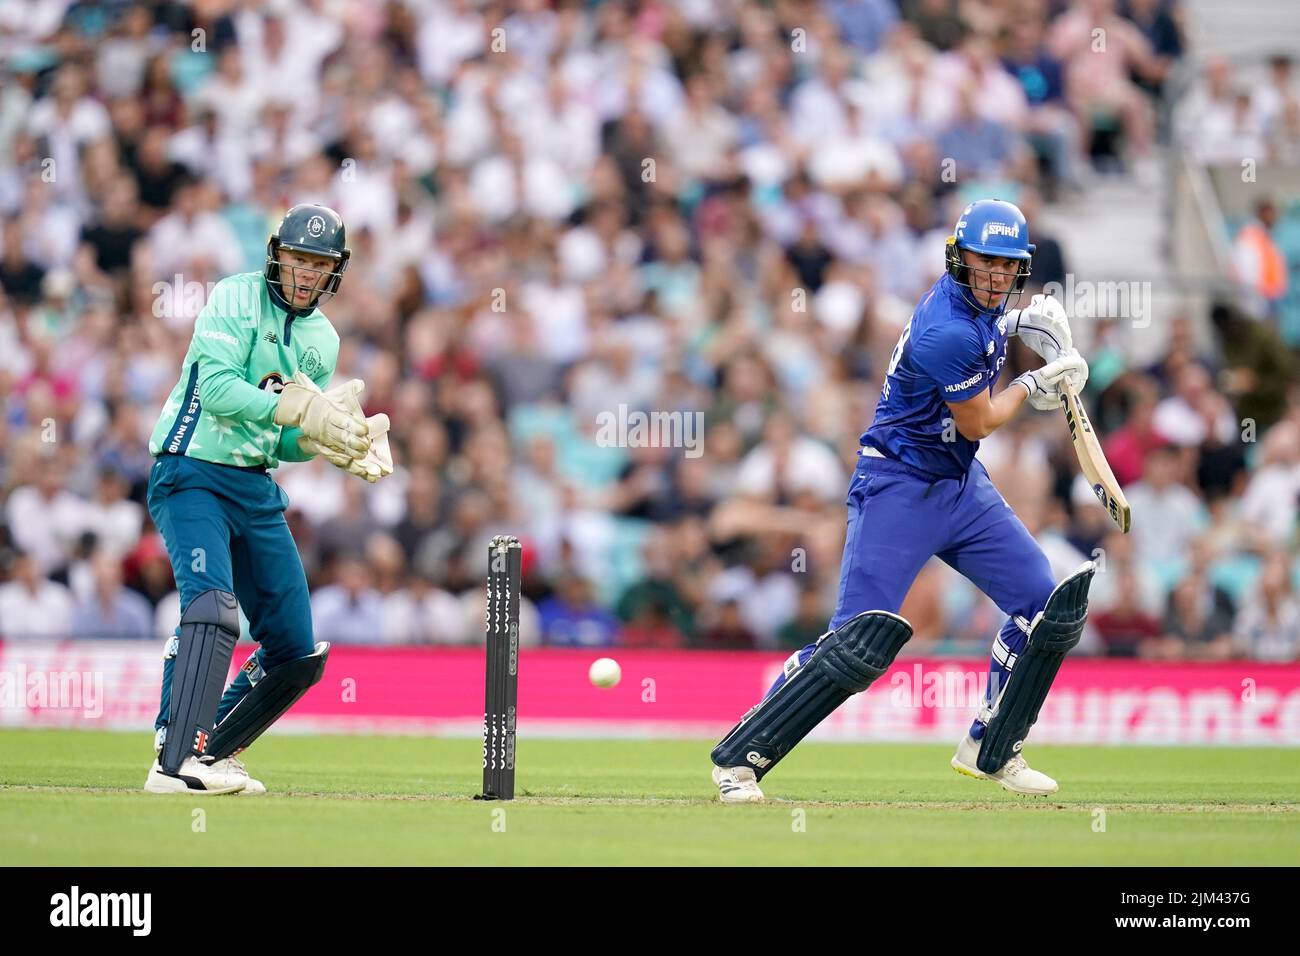 London Spirit's Dan Lawrence batting during The Hundred match at The Kia Oval, London. Picture date: Thursday August 4, 2022. Stock Photo